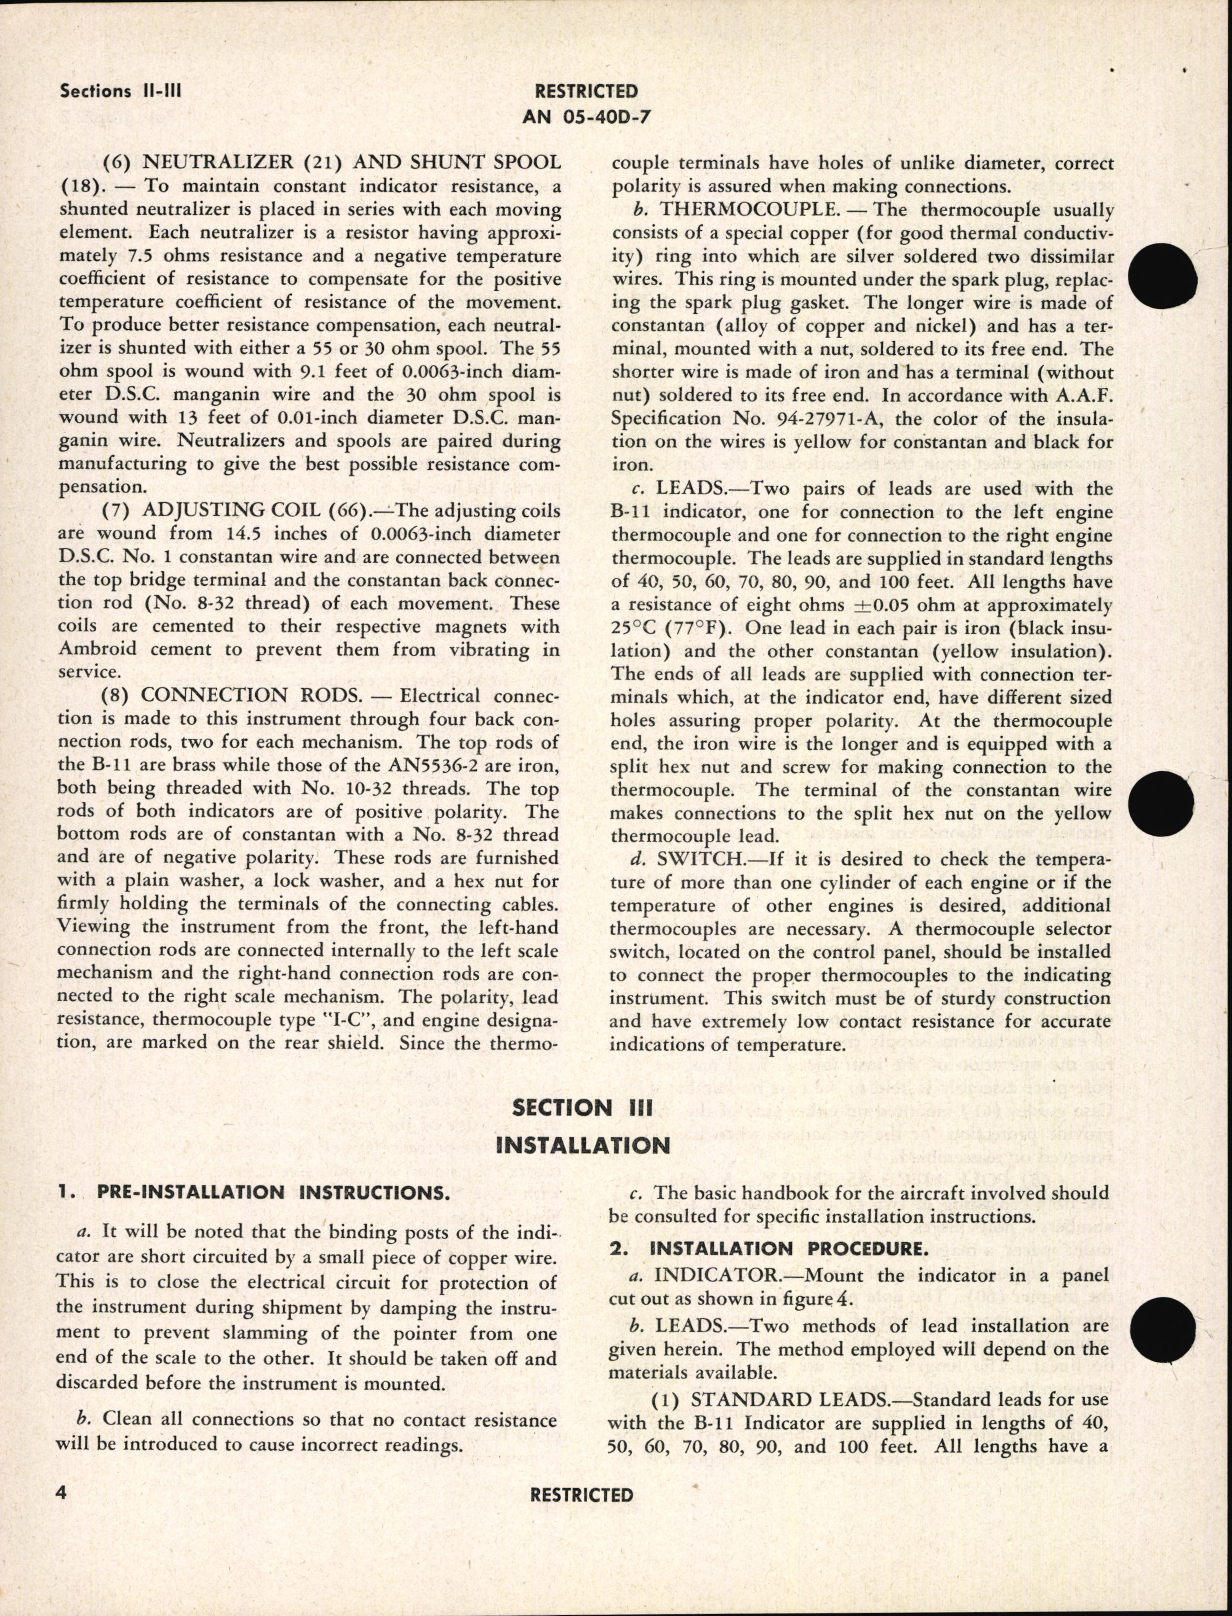 Sample page 8 from AirCorps Library document: Handbook of Instructions with Parts Catalog for Thermocouple Thermometers